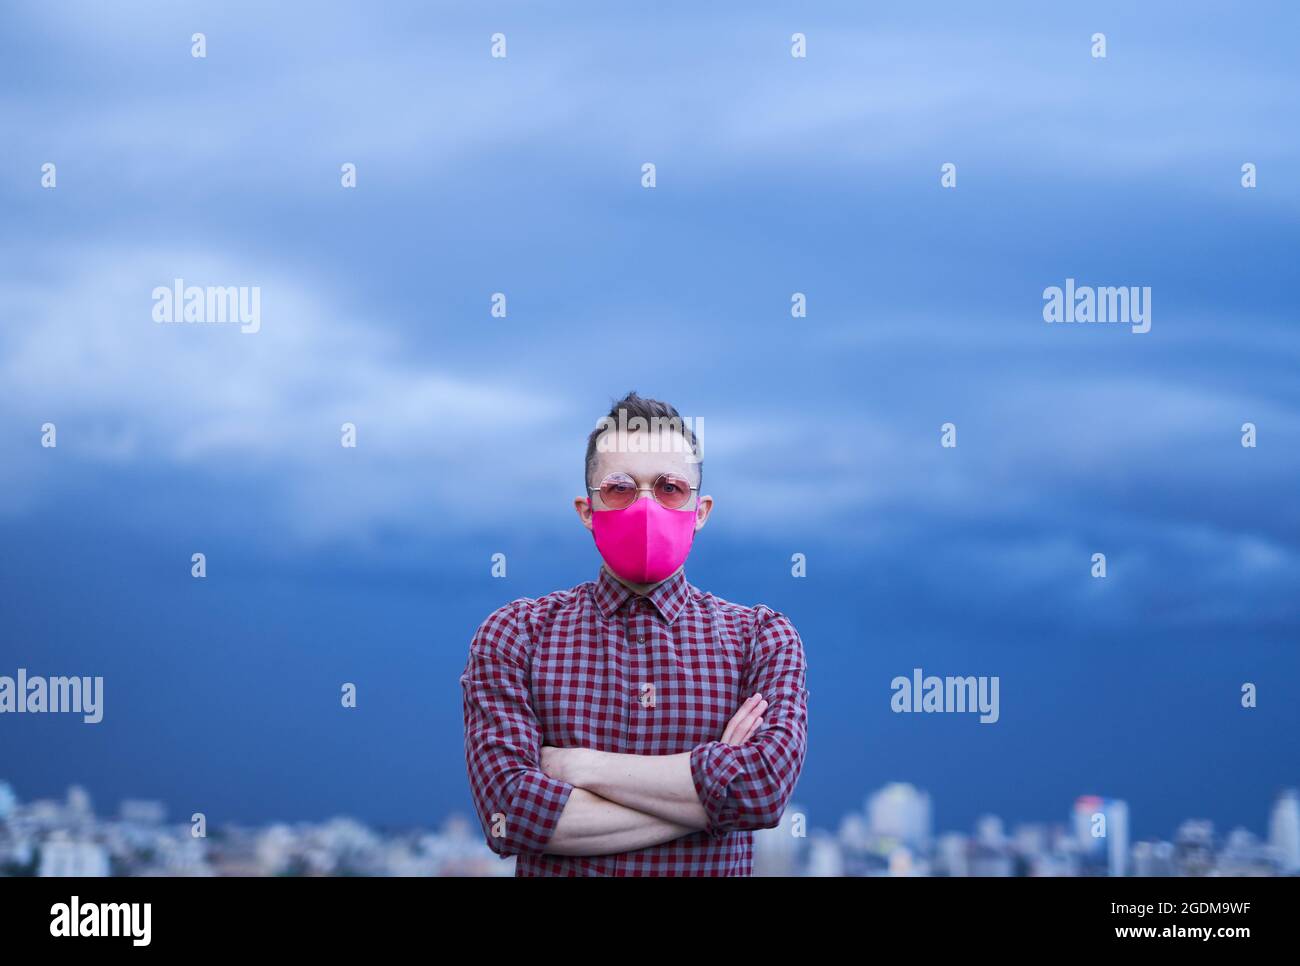 Cute caucasian gay in pink protective face mask and pink sunglasses looking straight in camera. Concept of hope, LGBTQ theme. Male person portrait with rainy weather background and urban skyline Stock Photo